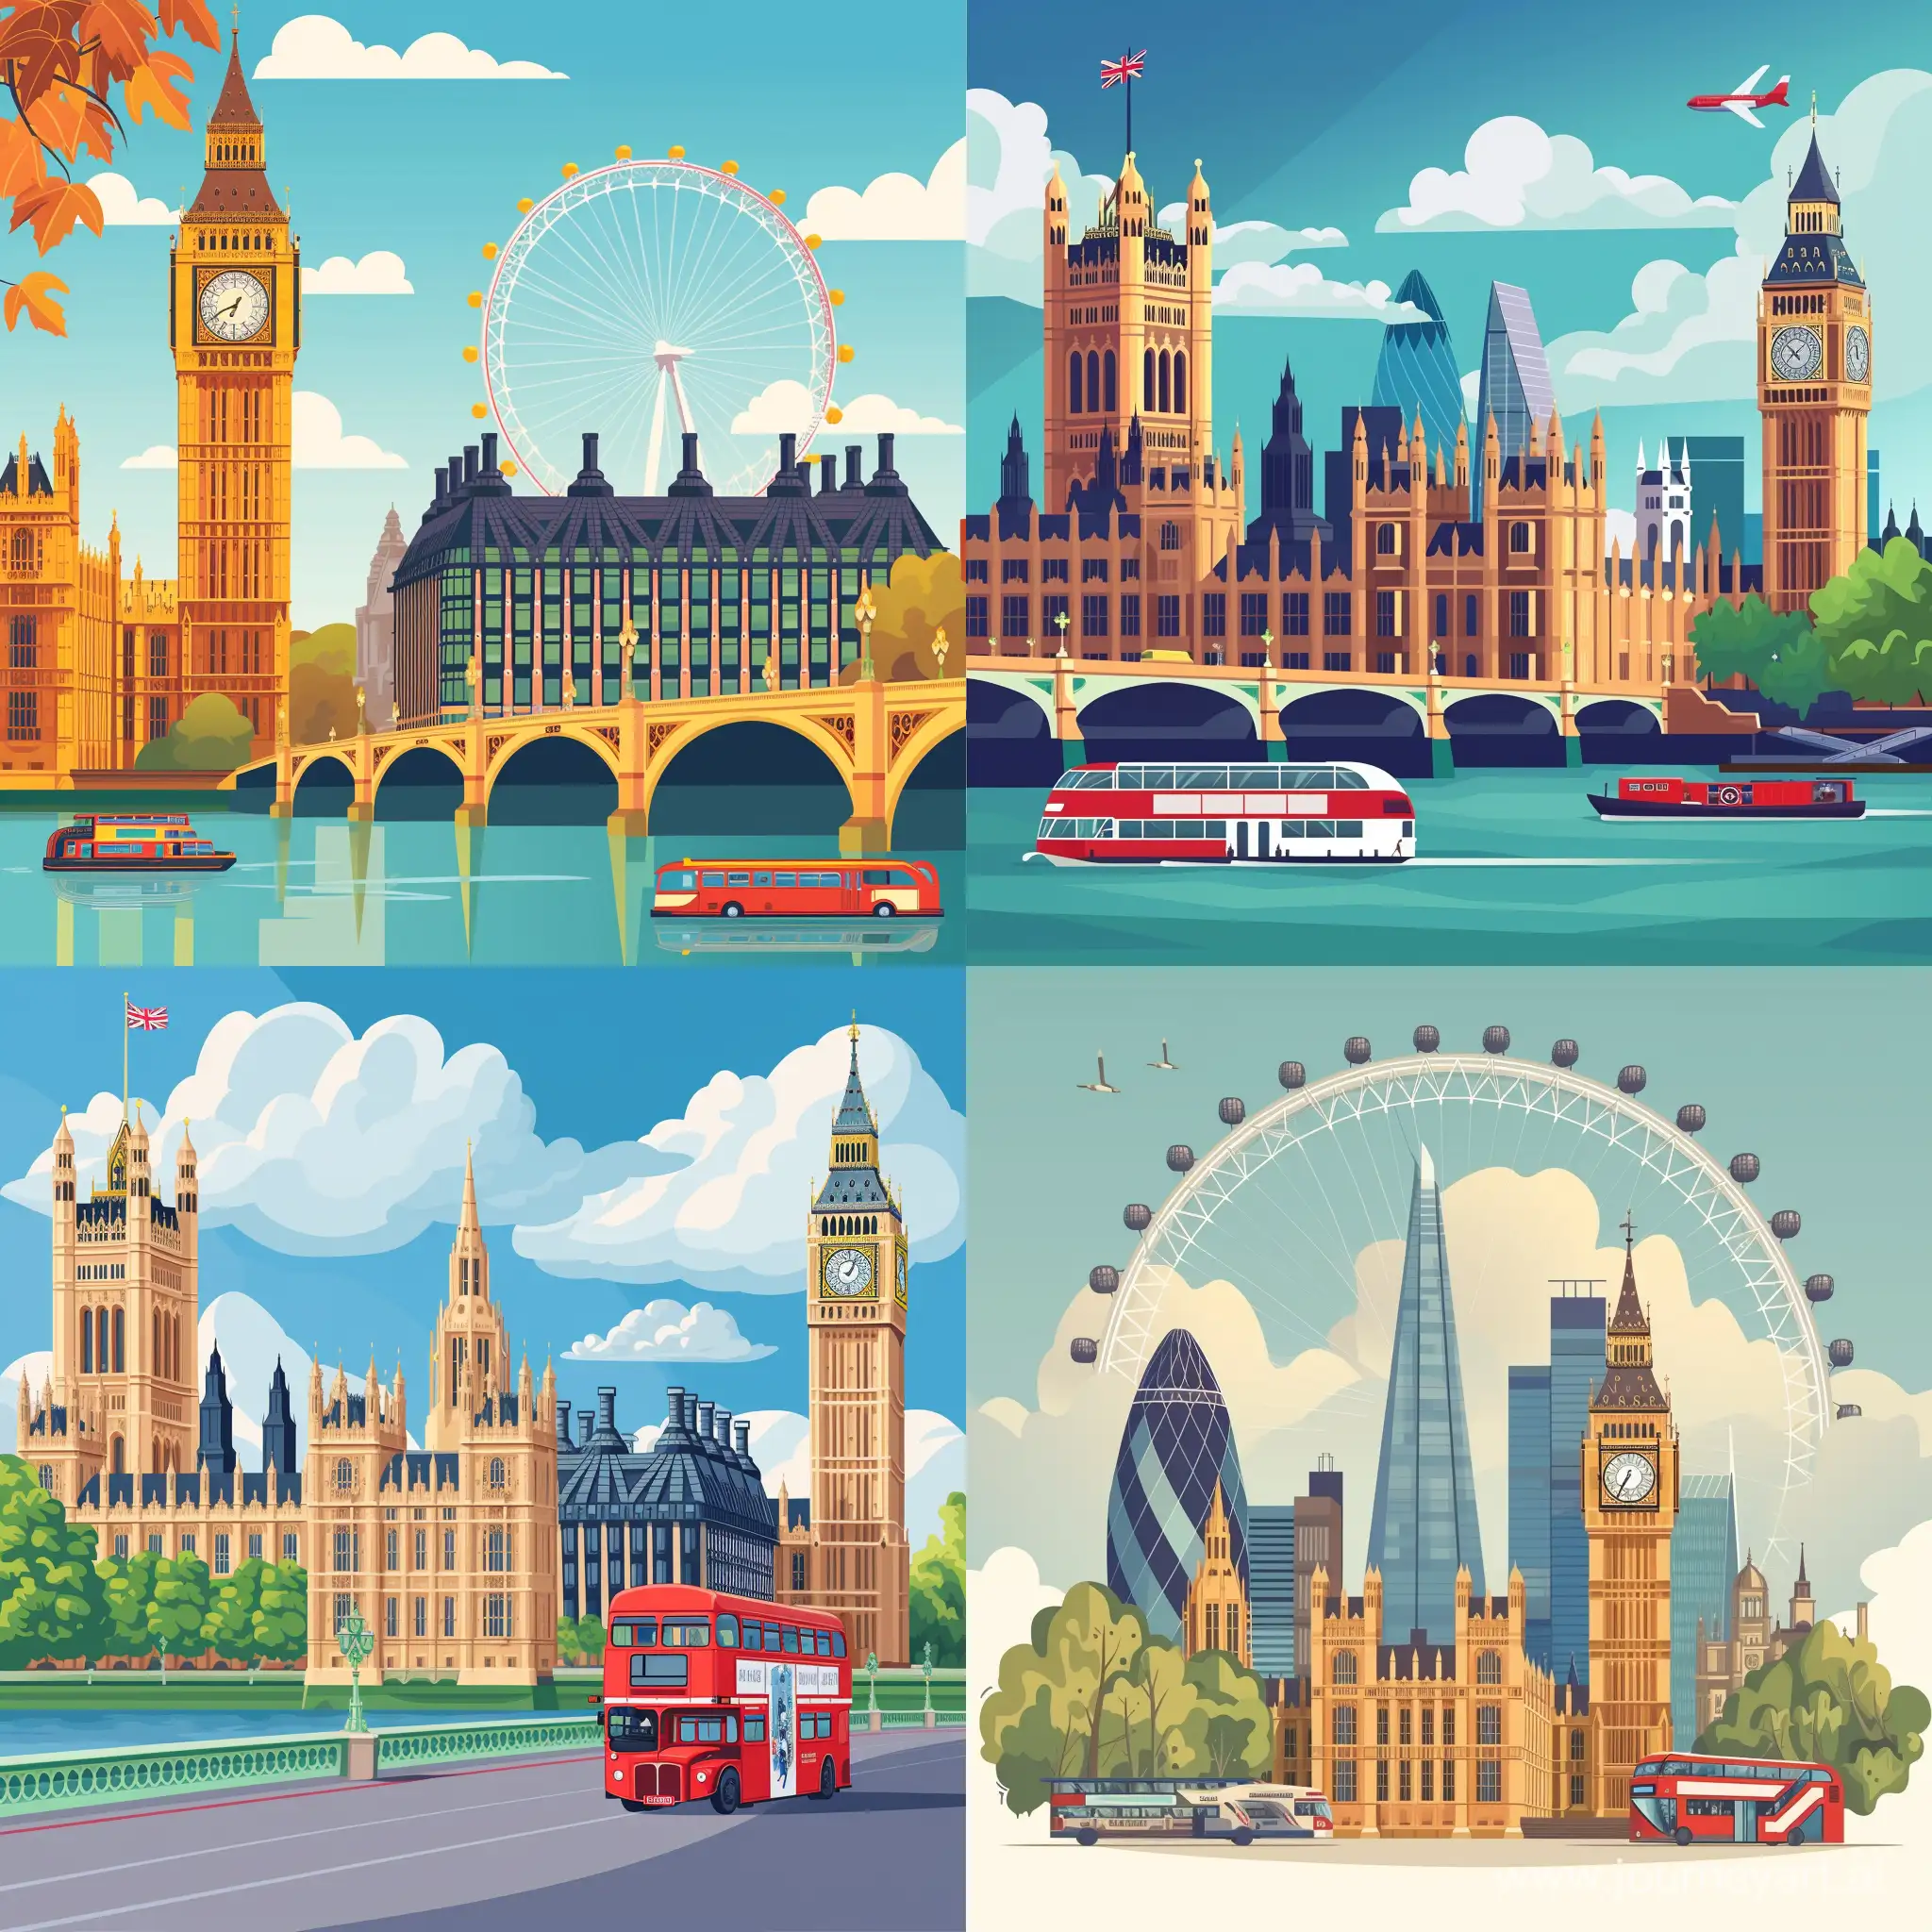 London-Landmarks-Vector-Illustration-Iconic-Tourist-Attractions-in-Vibrant-Style